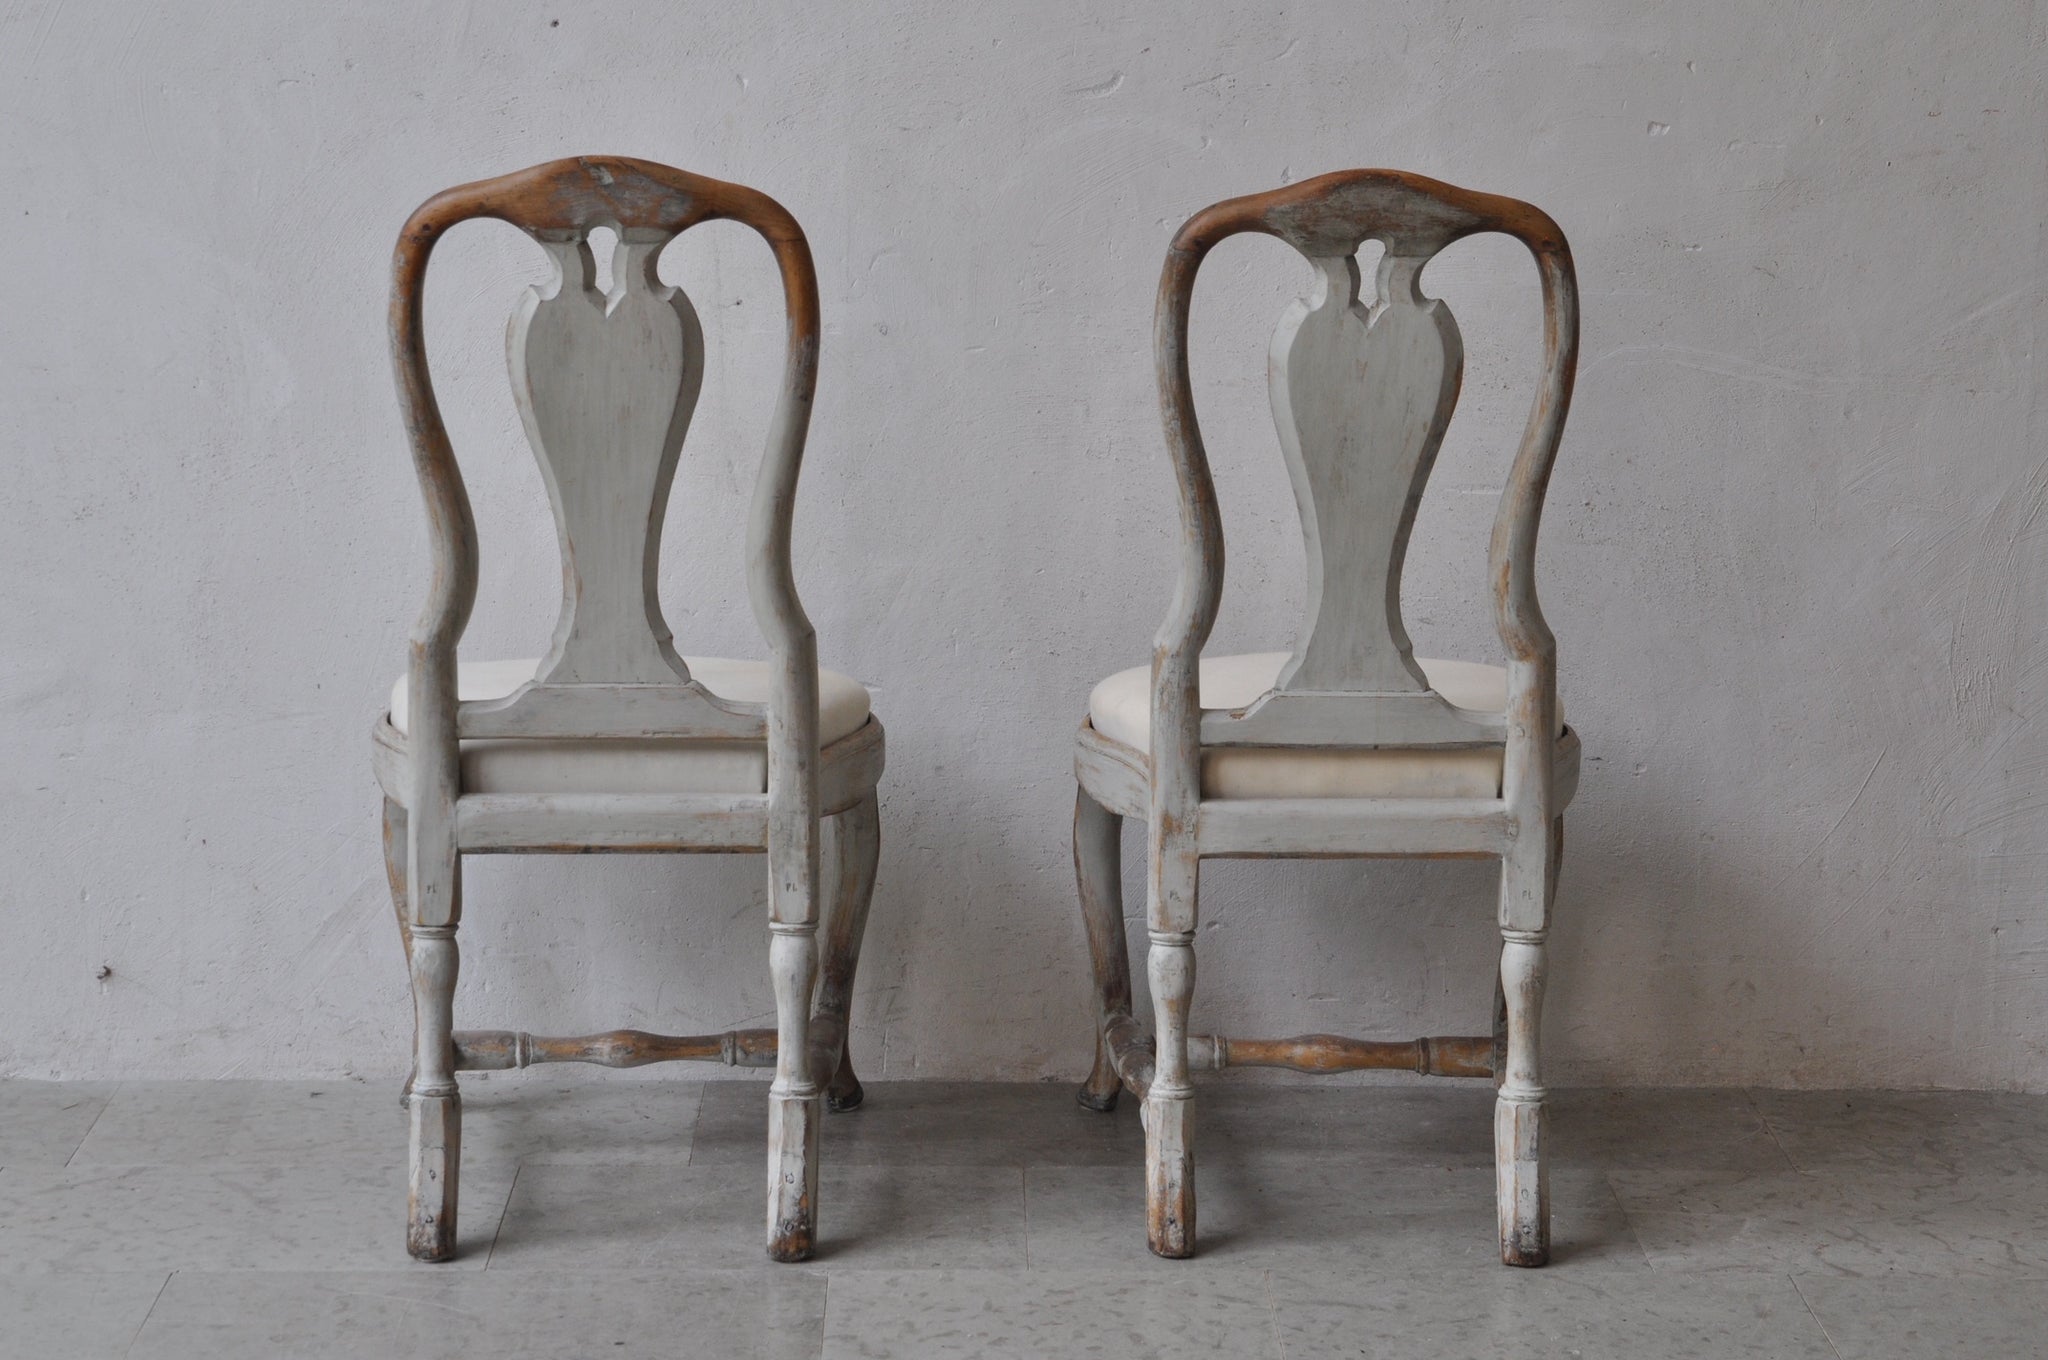 Pair of Rococo Chairs c1770